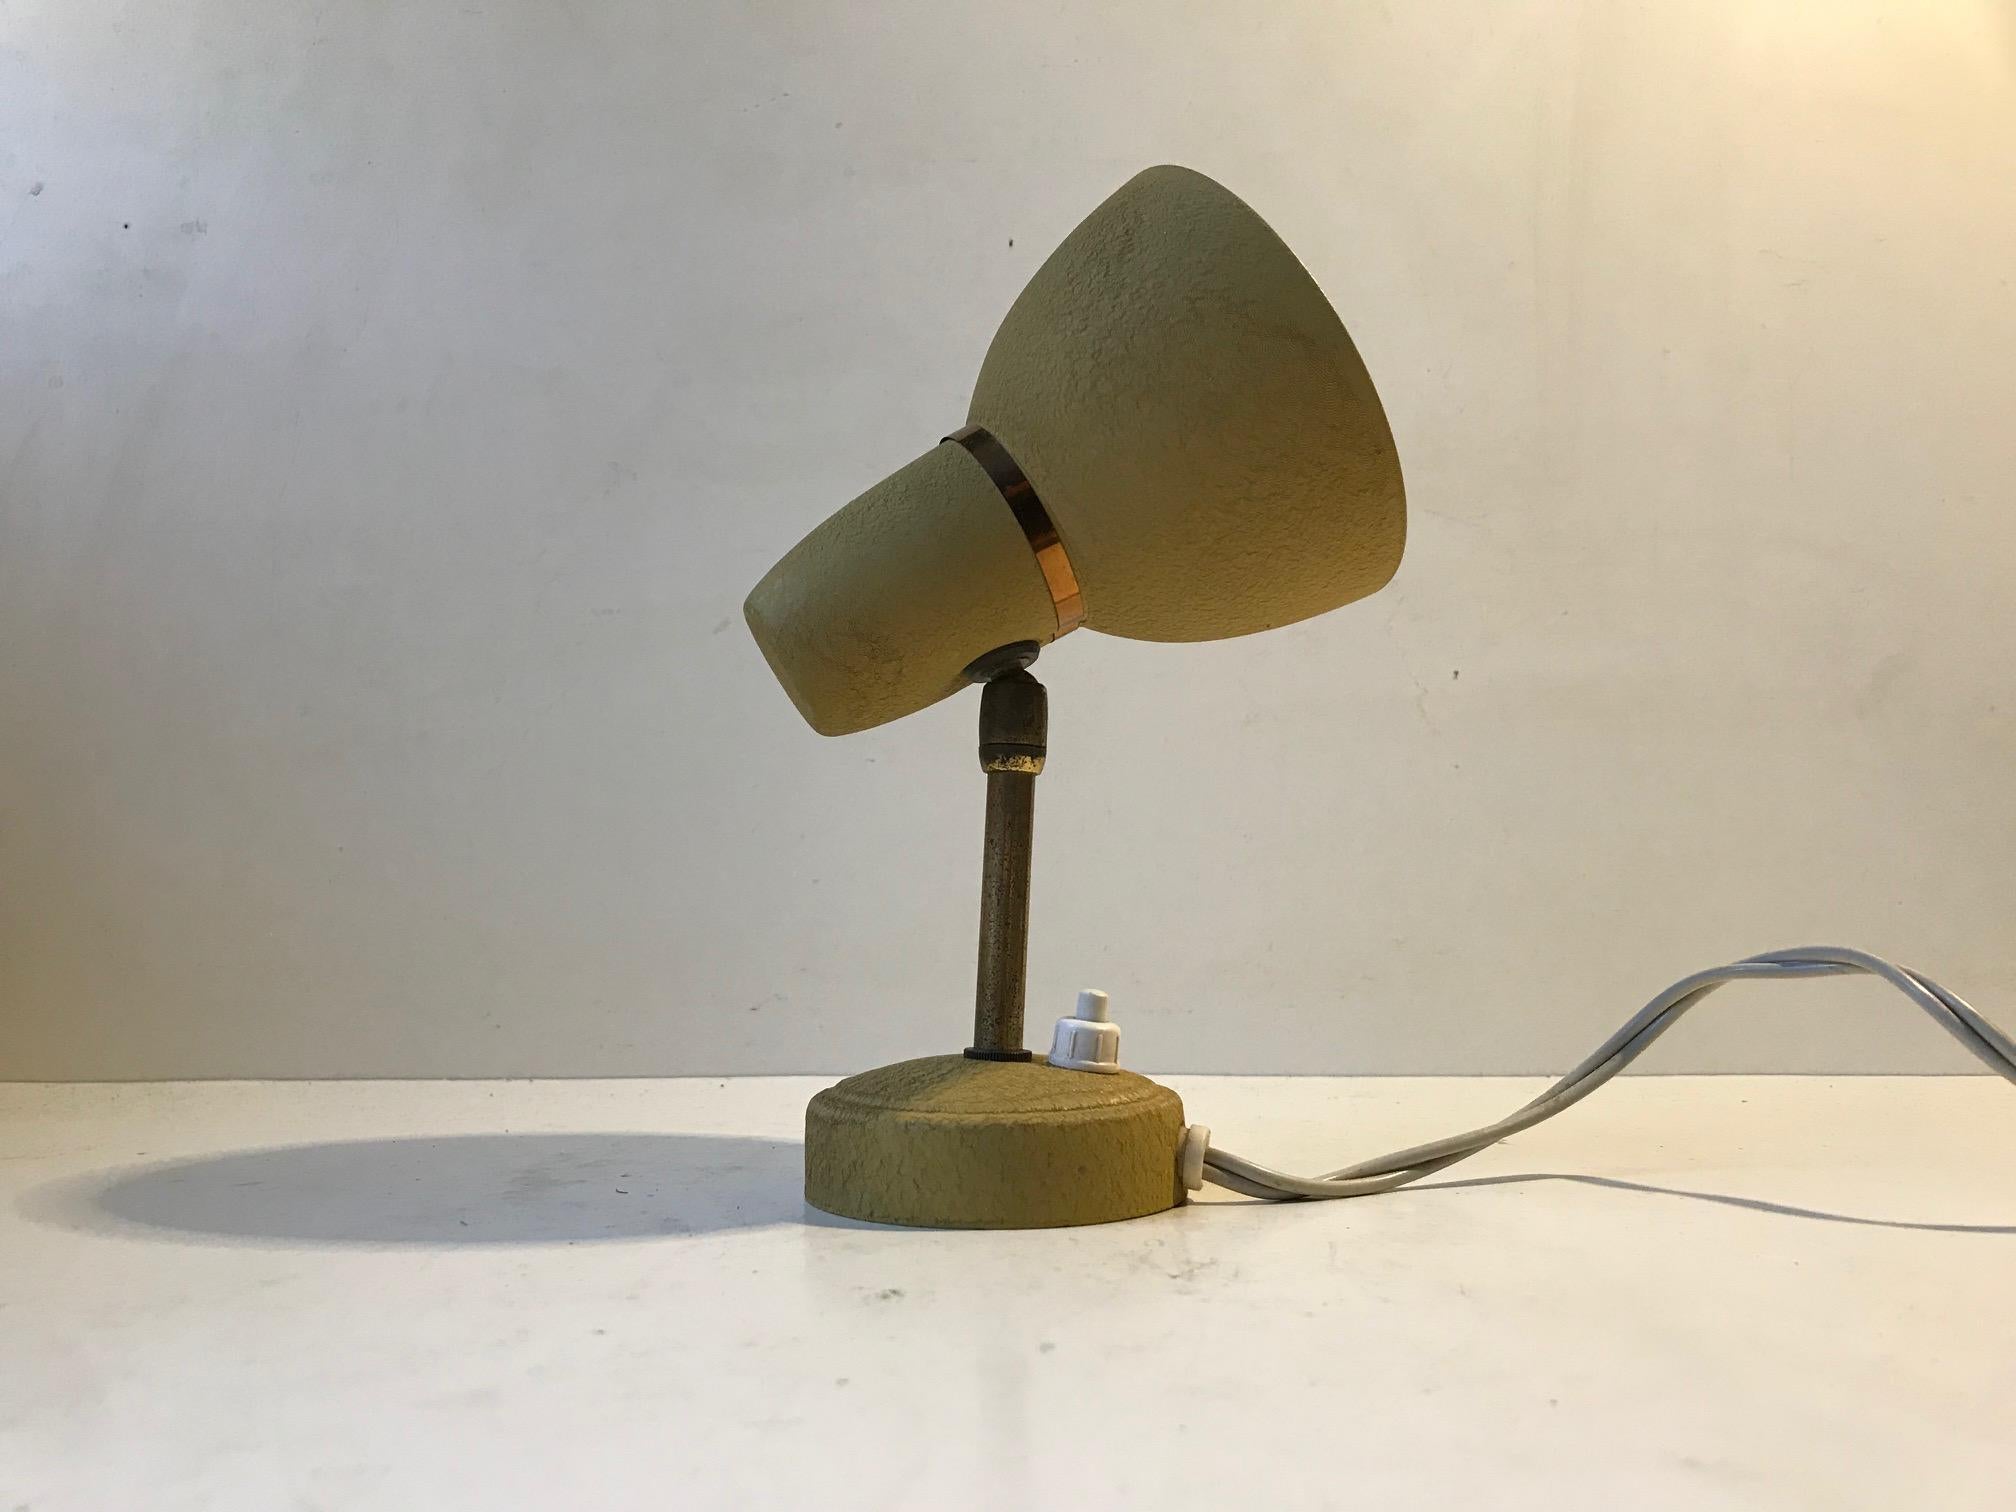 Mid-20th Century Scandinavian Pastel Yellow Wall Lamp in Brass and Alu, 1950s For Sale